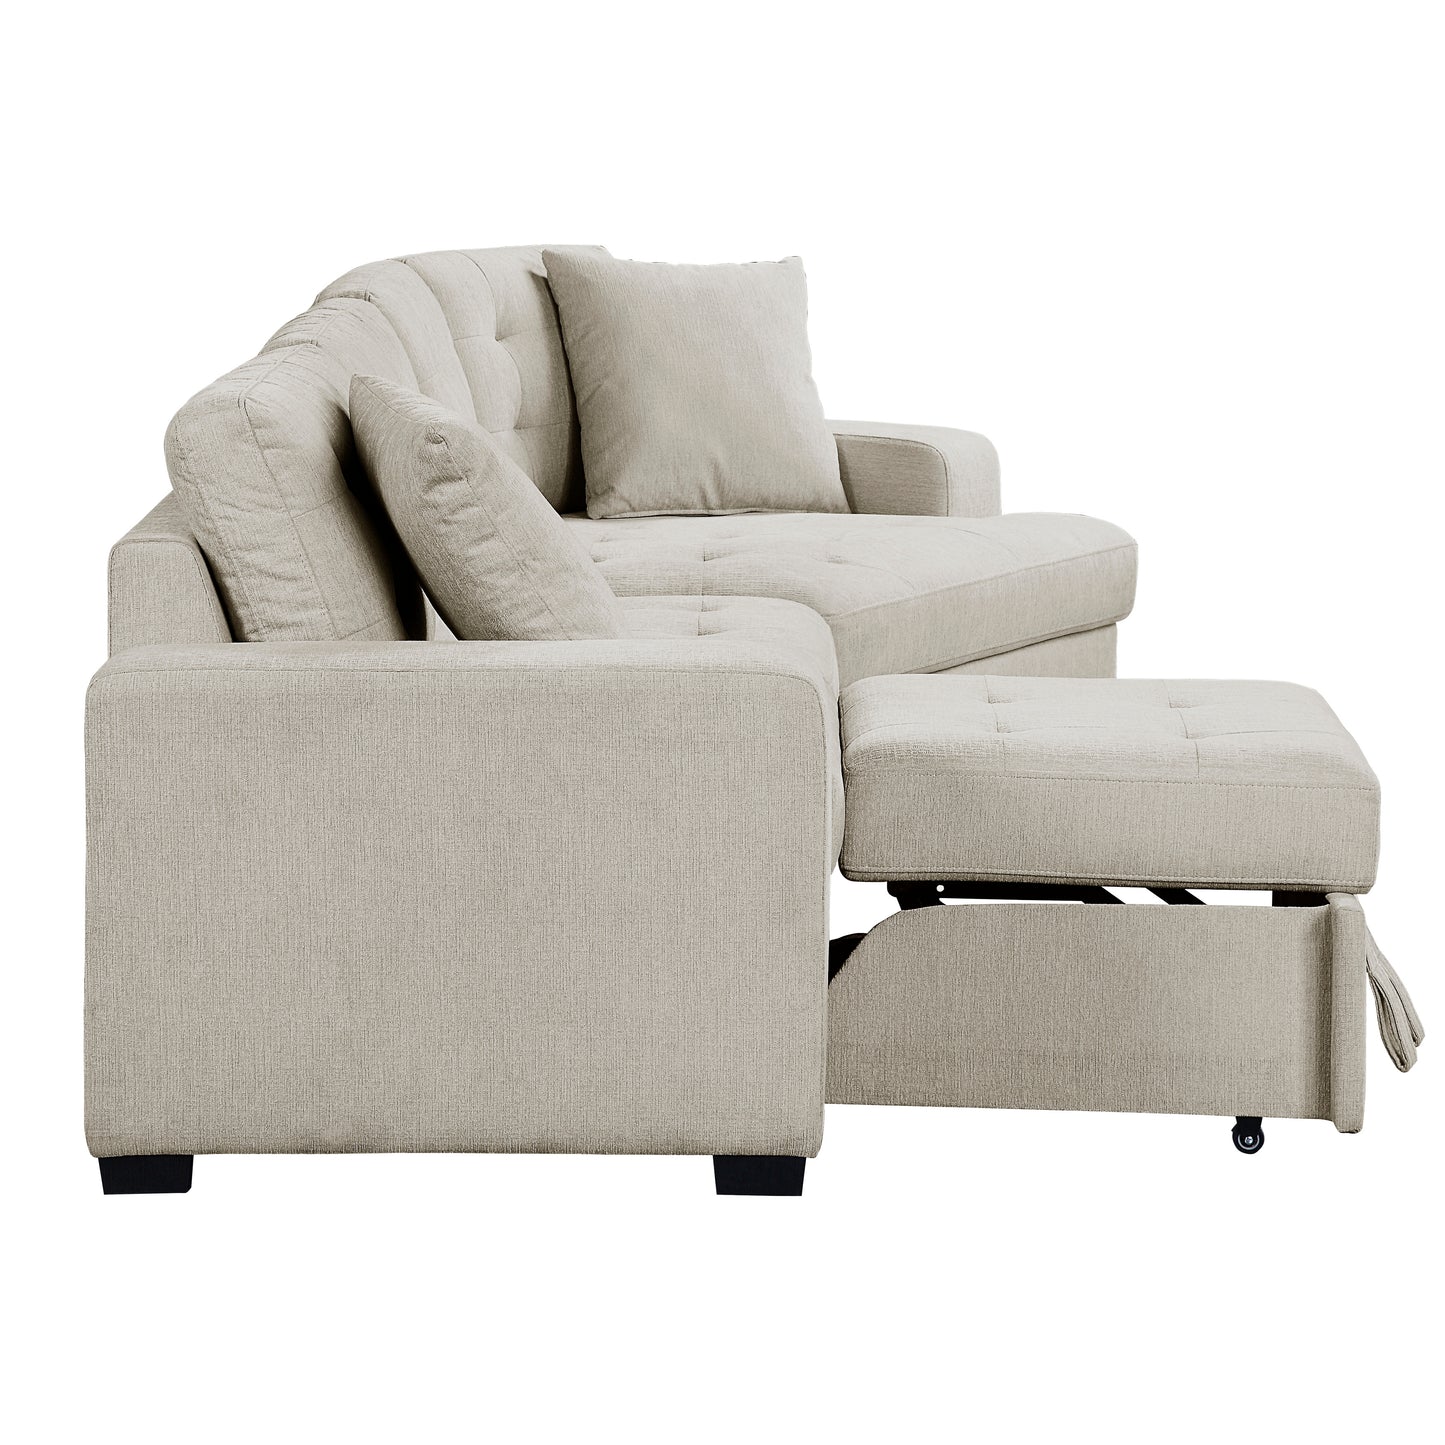 Logansport 2-Piece Sectional with Pull-out Ottoman BEIGE